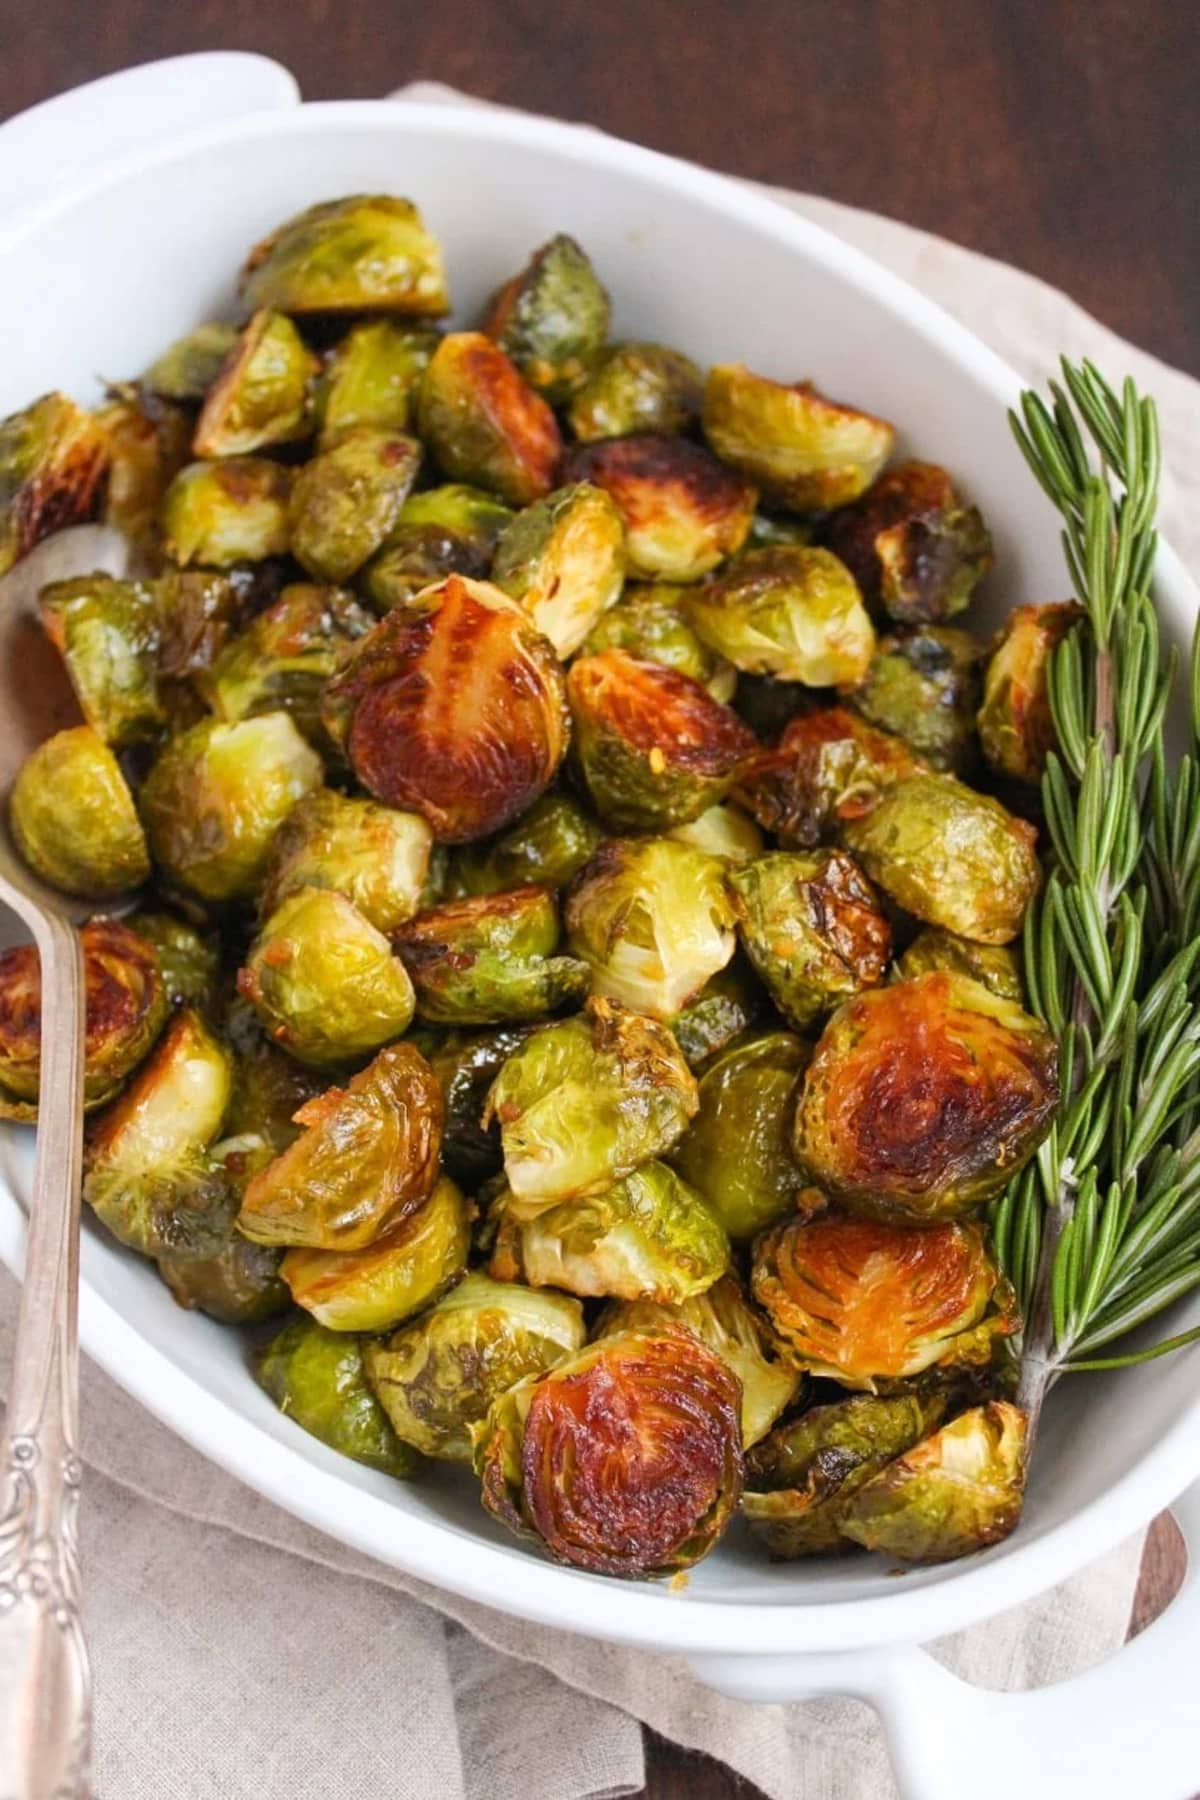 Miso & honey roasted brussels sprouts